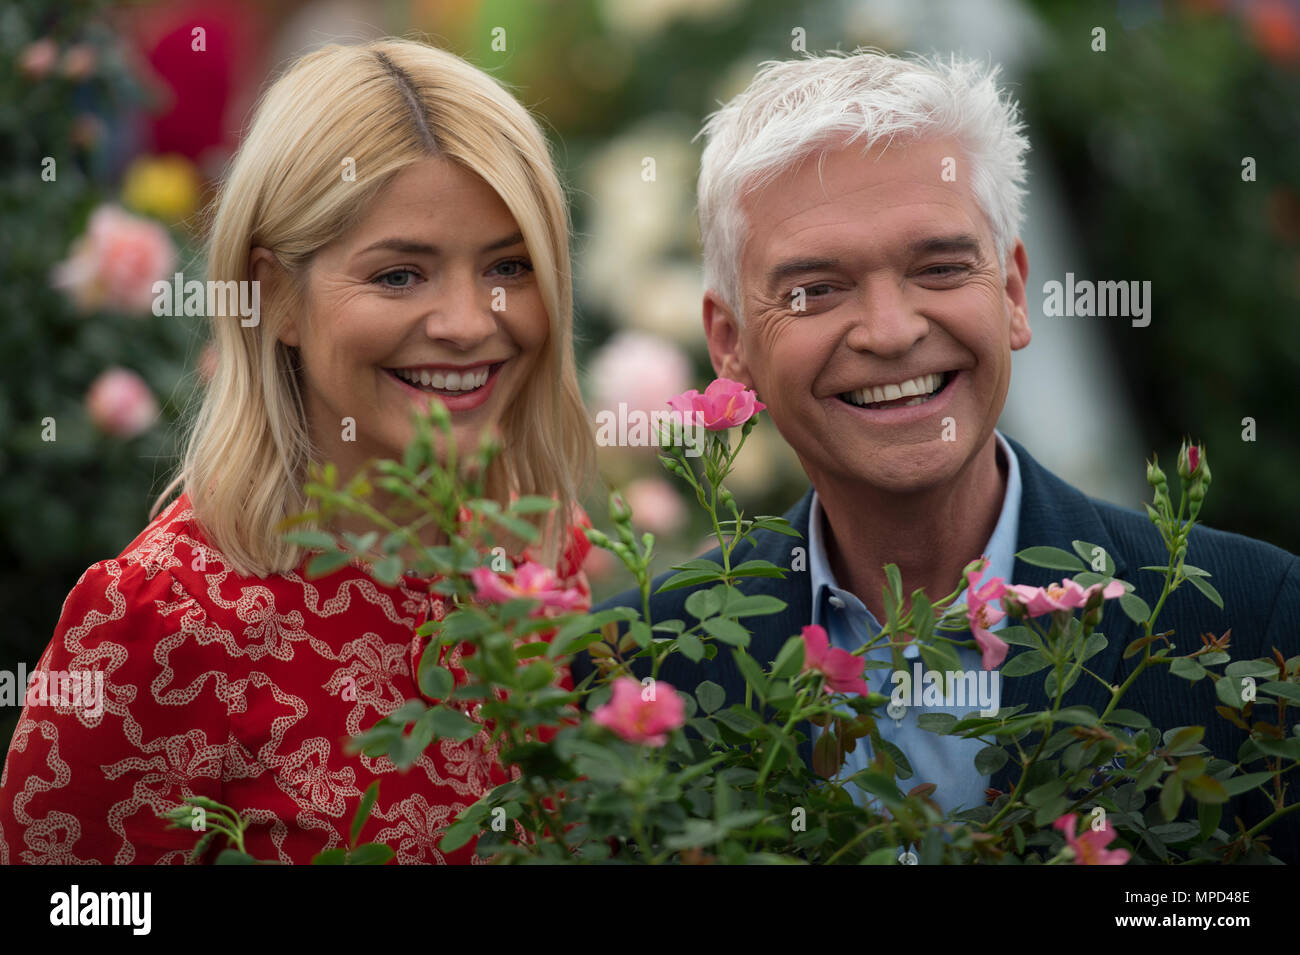 Phillip Schofield and Holly Willoughby, ITV This Morning presenters, unveils a special rose named ‘The Morning’ at Chelsea Flower Show 2018. Stock Photo